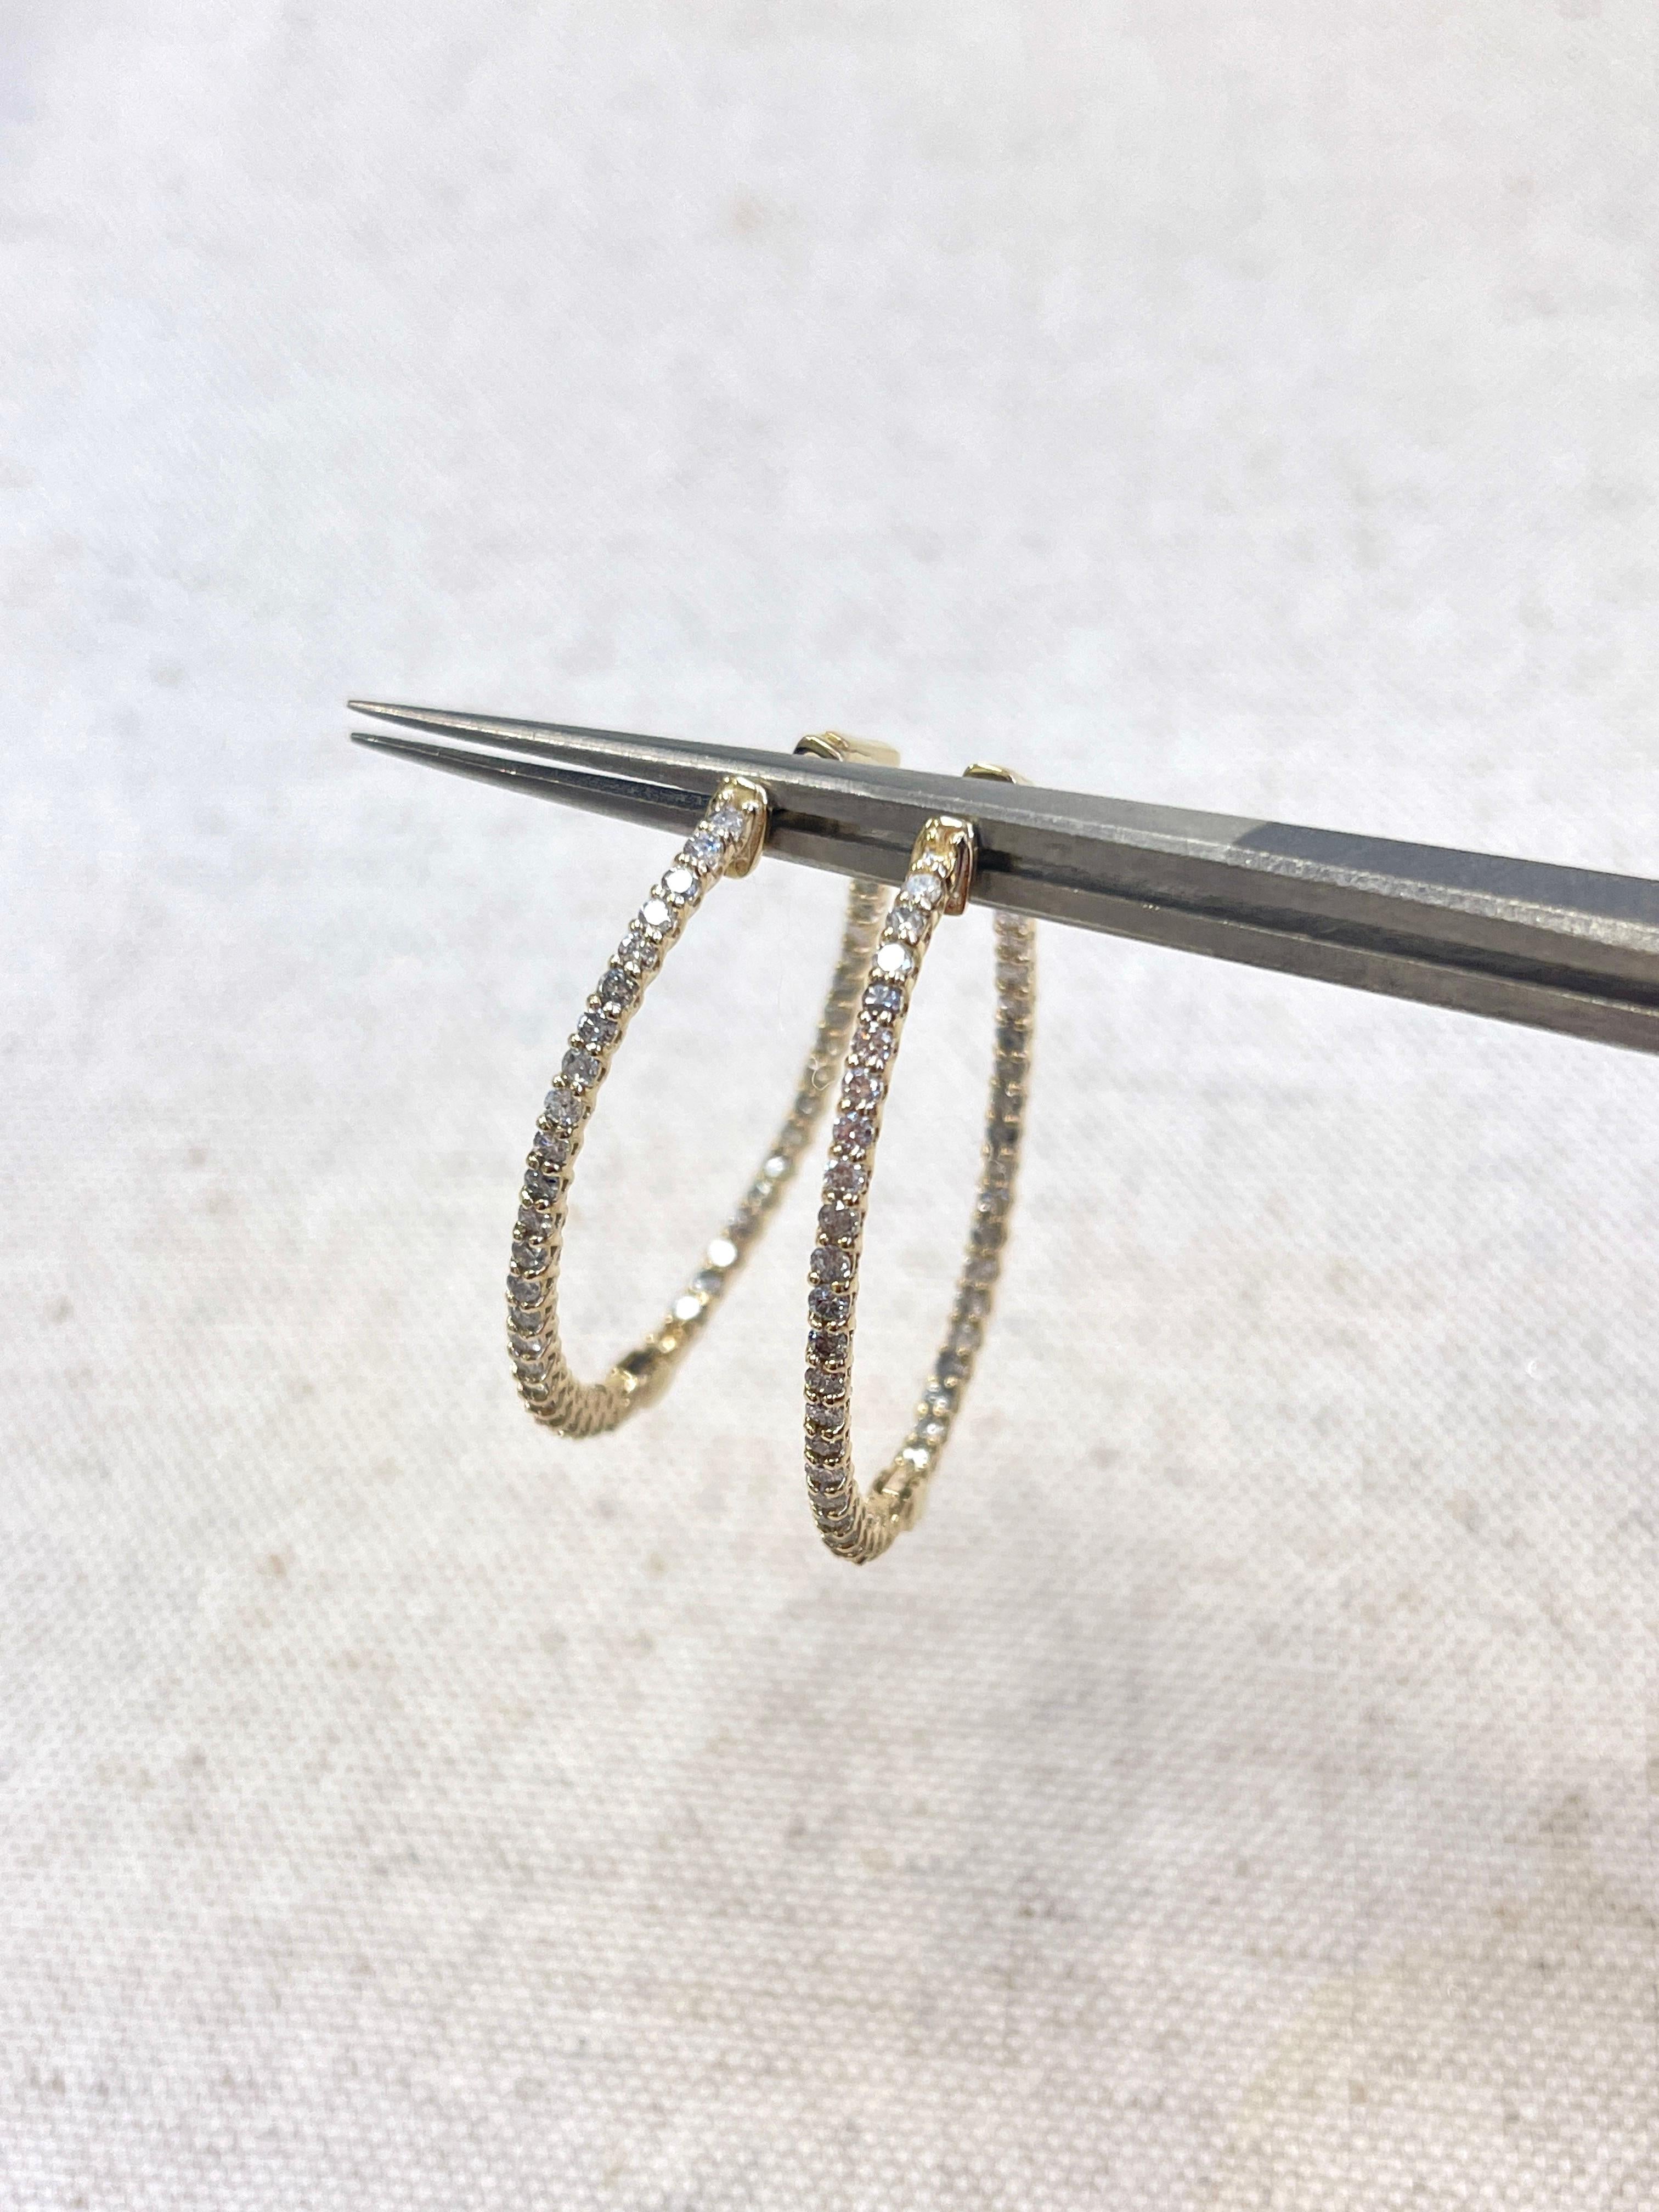 Beautiful pair of natural diamond inside out oval hoop earrings in 14k yellow gold. Secures with snap closure for wear. Average Color F, Clarity I, Measures 1.40 inch. 

*Free shipping within the U.S.*